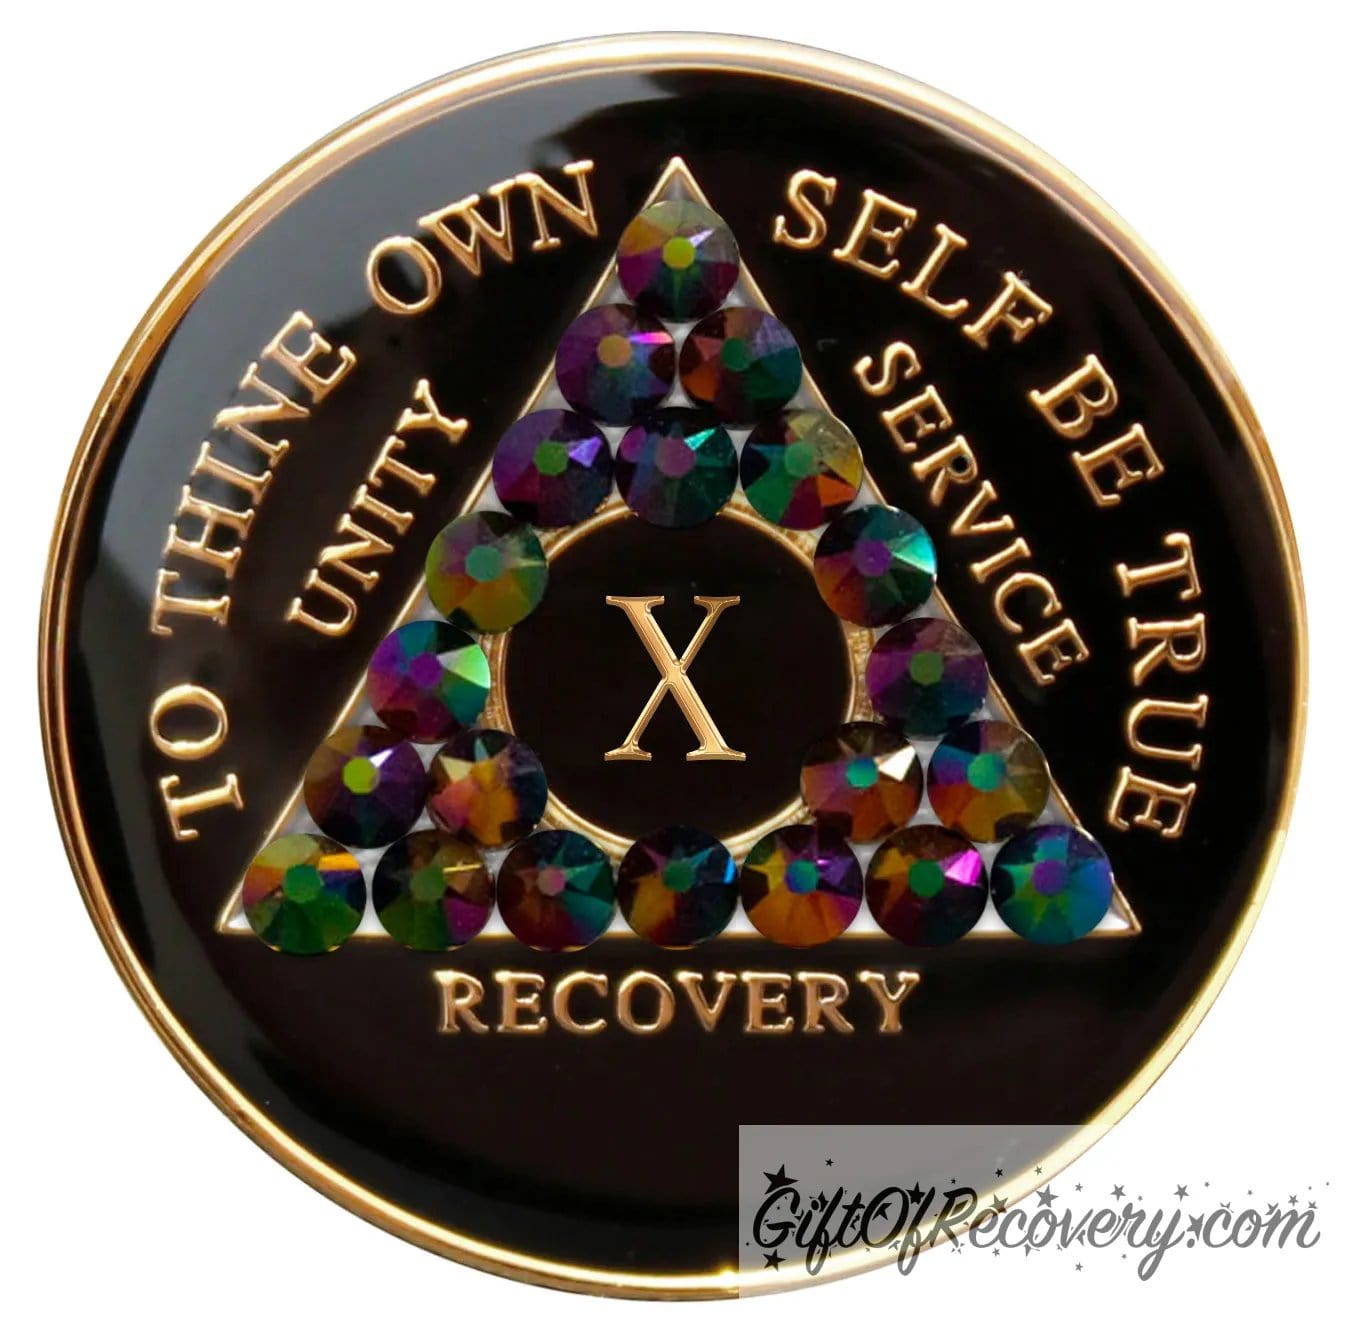 10 year black onyx AA recovery medallion, with 21 genuine peacock crystals, symbolizing the beauty and diversity of recovery journeys, the AA medallion has; to thine own self be true, unity, service, recovery, roman numeral, and the rim, embossed with 14k gold and sealed with resin for a glossy finish.